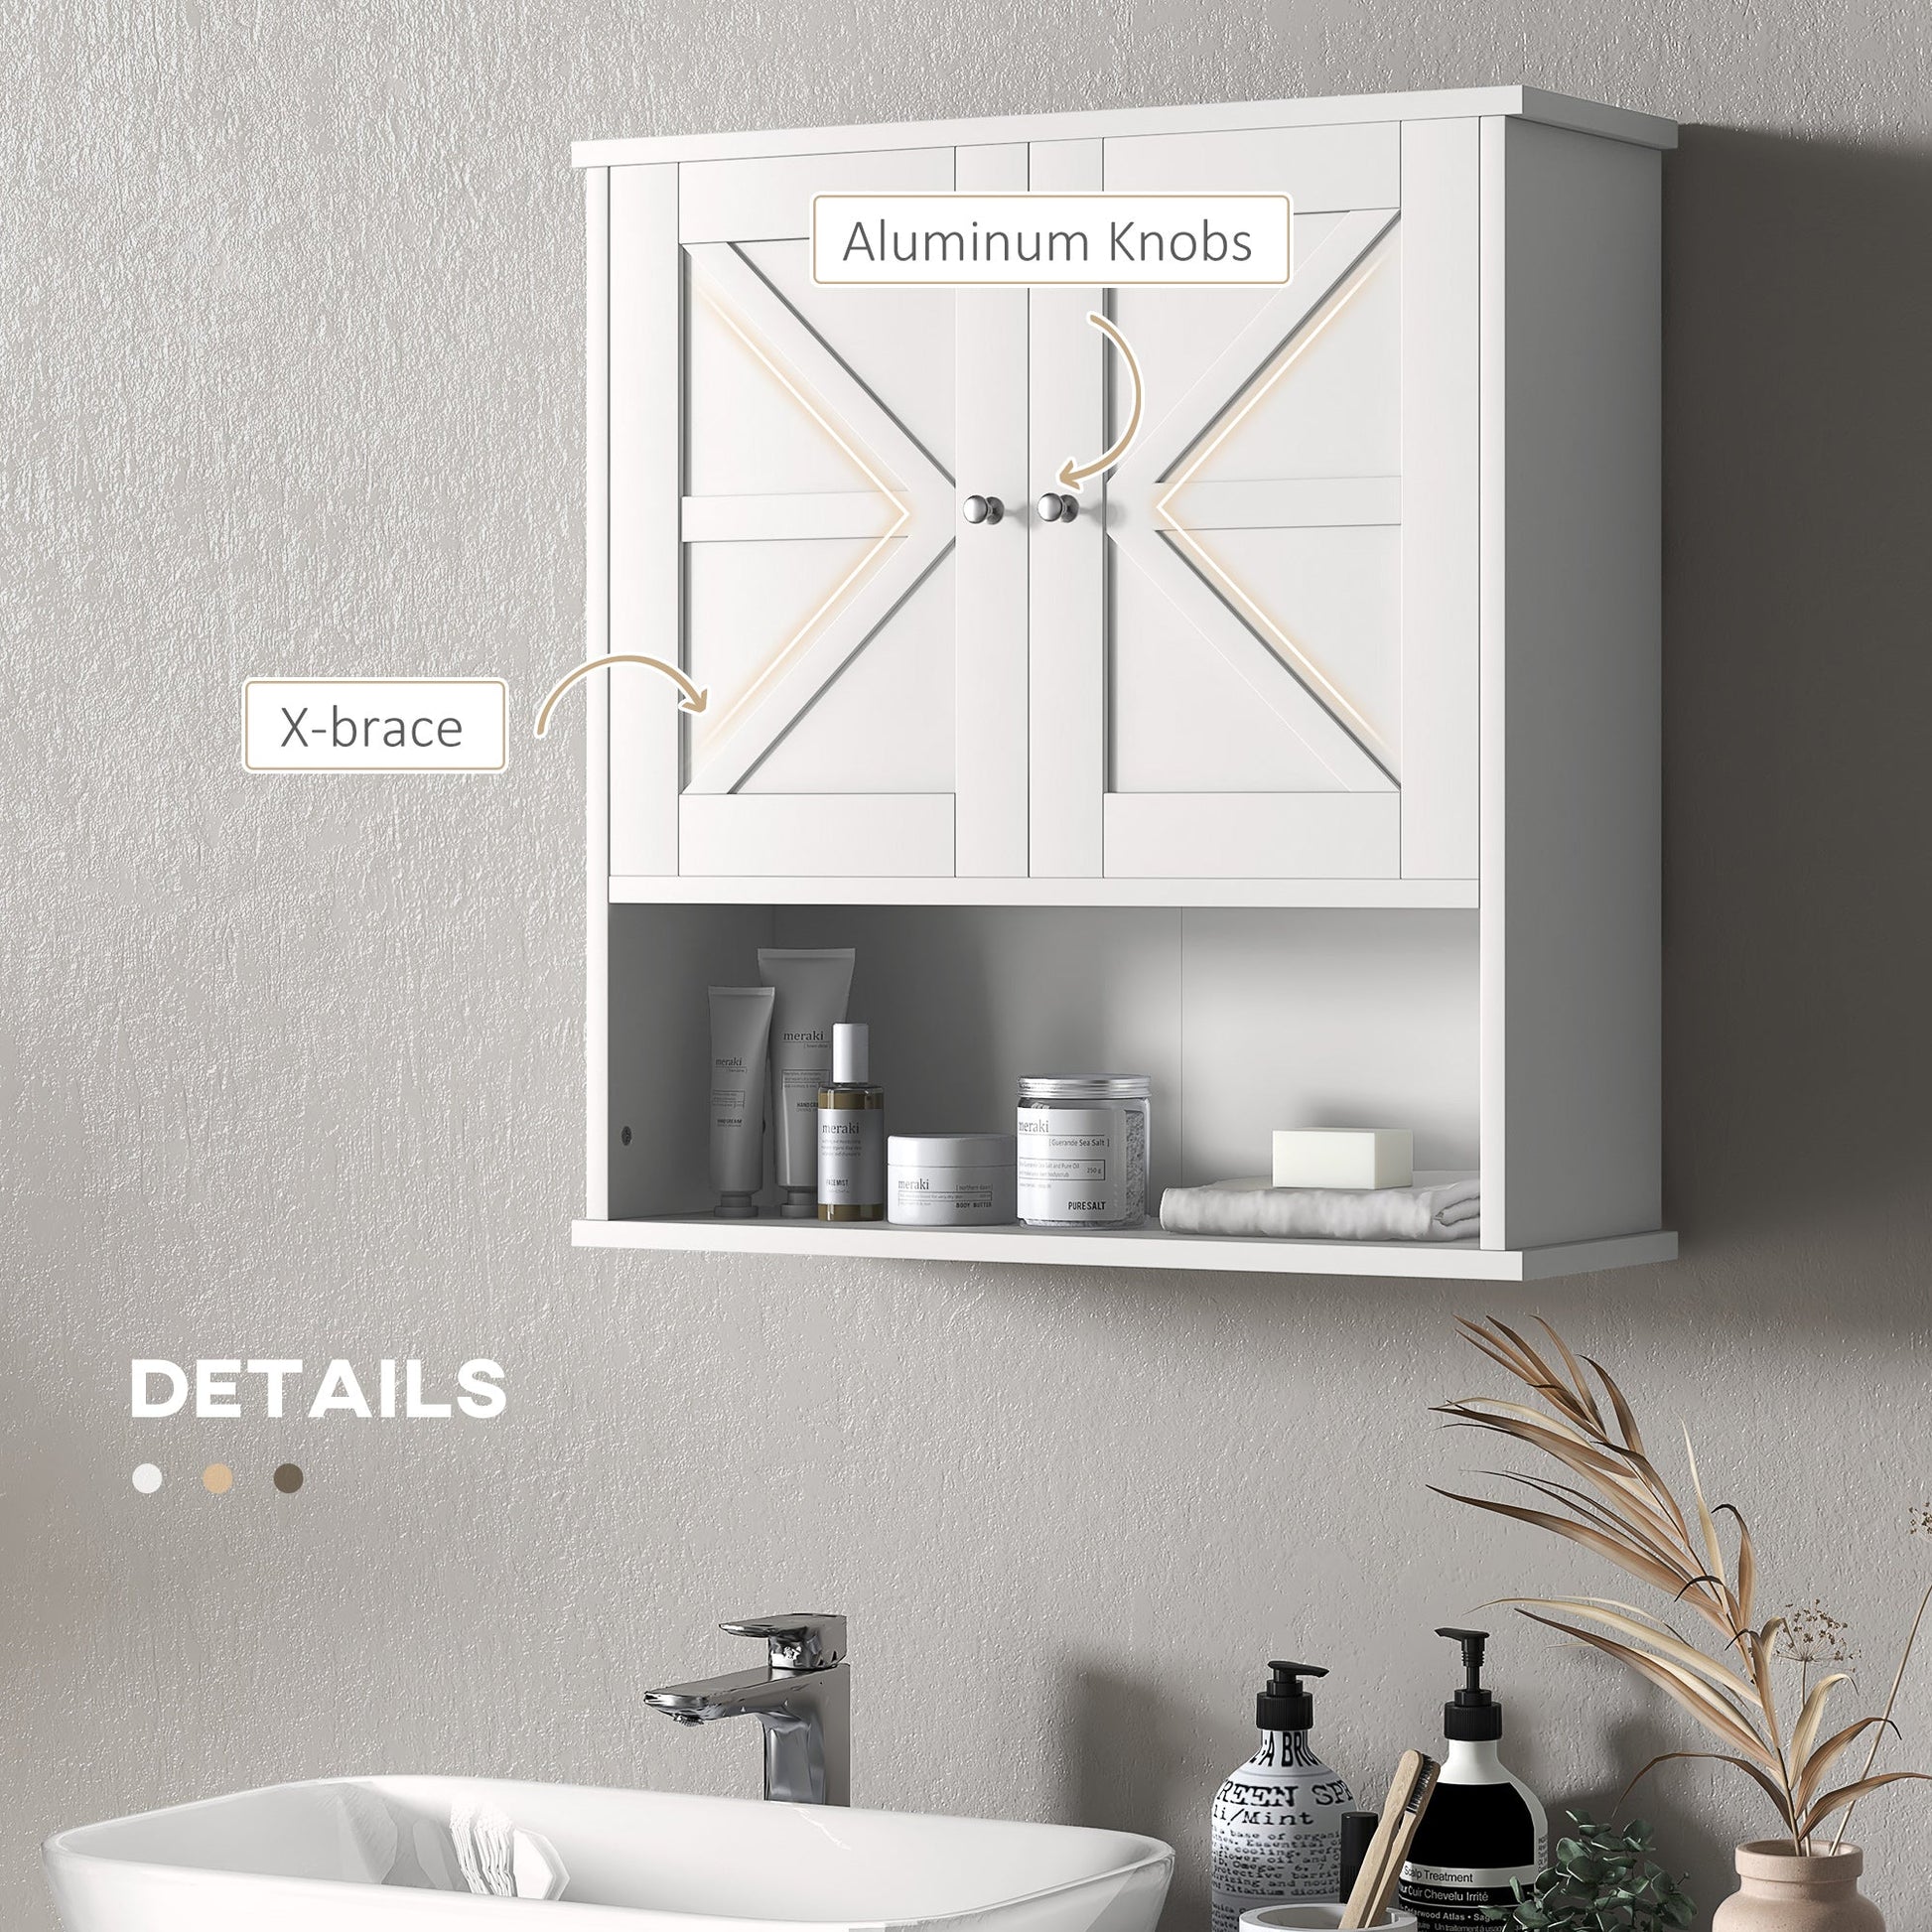 Farmhouse Bathroom Medicine Cabinet, Wall Cabinet with Barn Doors, and Adjustable Shelf for Laundry Room, White at Gallery Canada